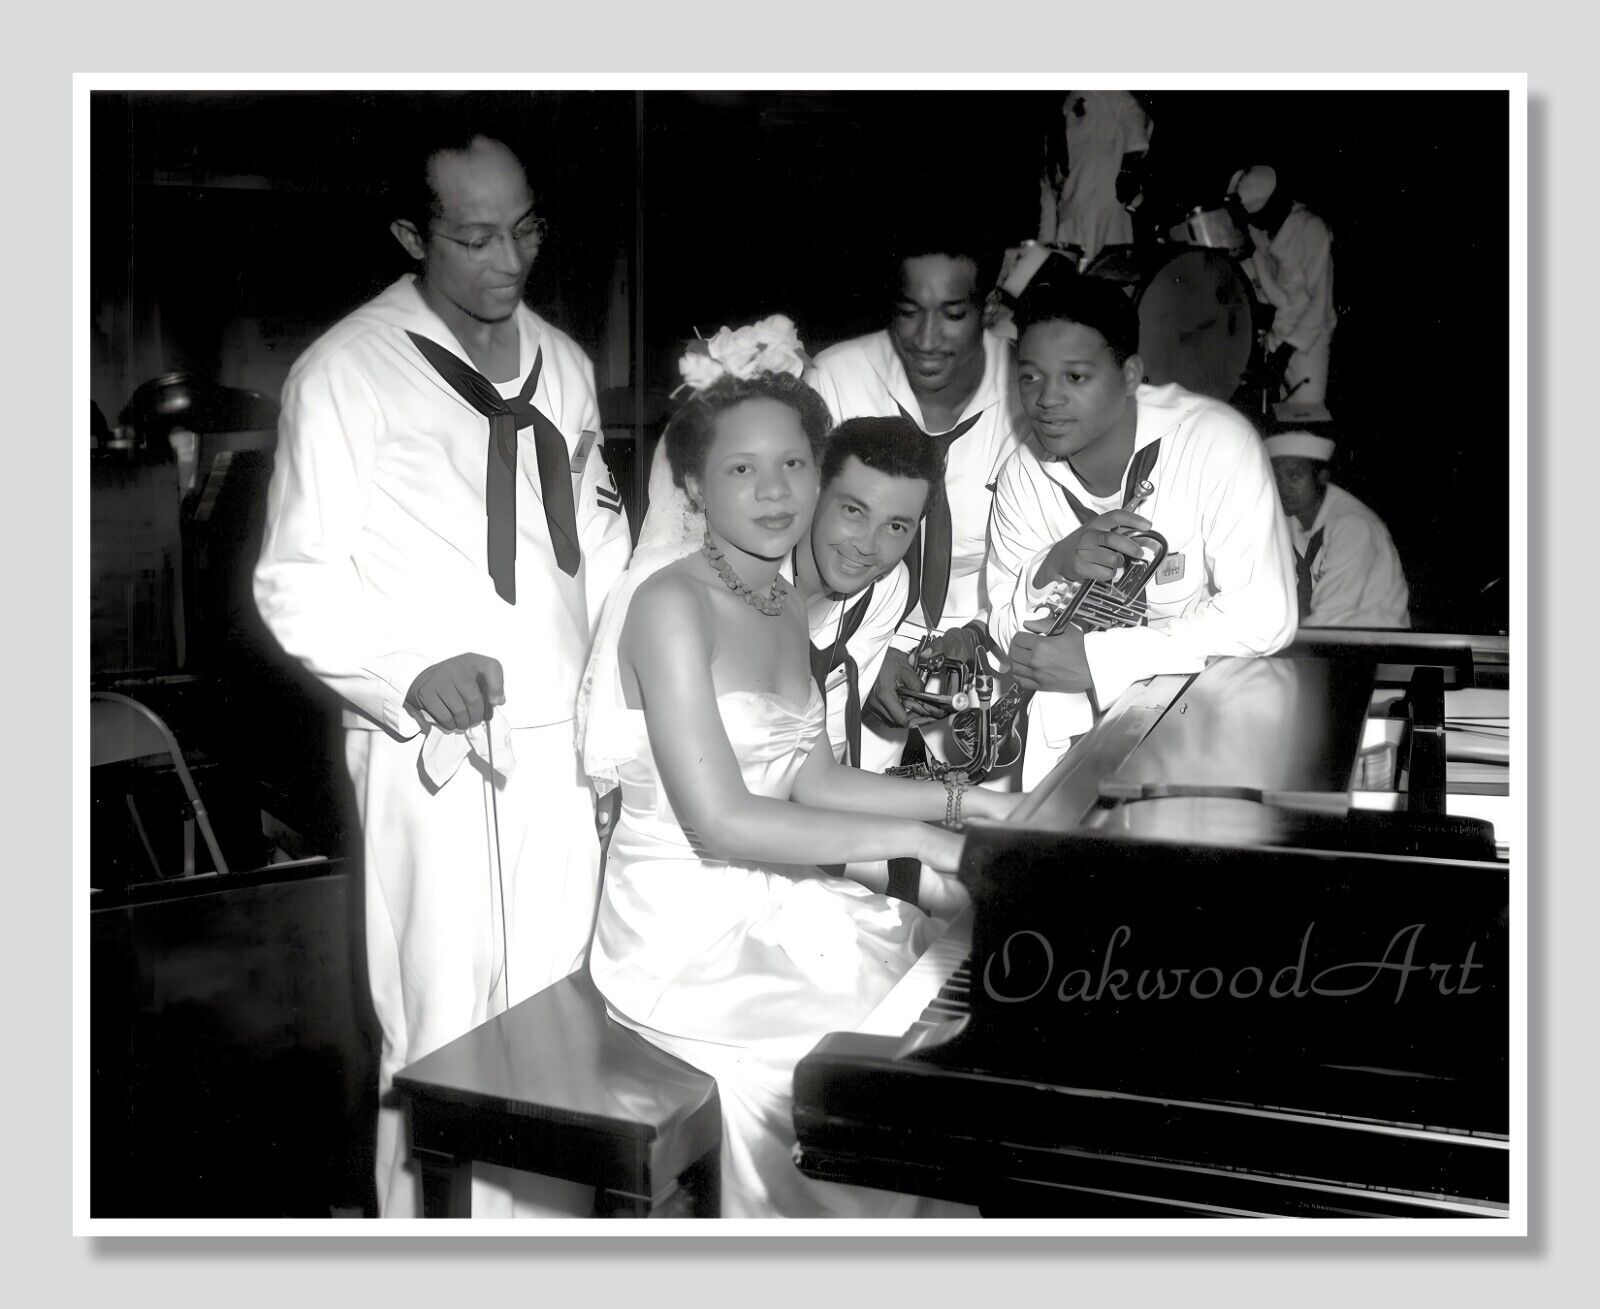 Black Bride on Piano Surrounded by Sailors c1940s, Vintage Photo Reprint